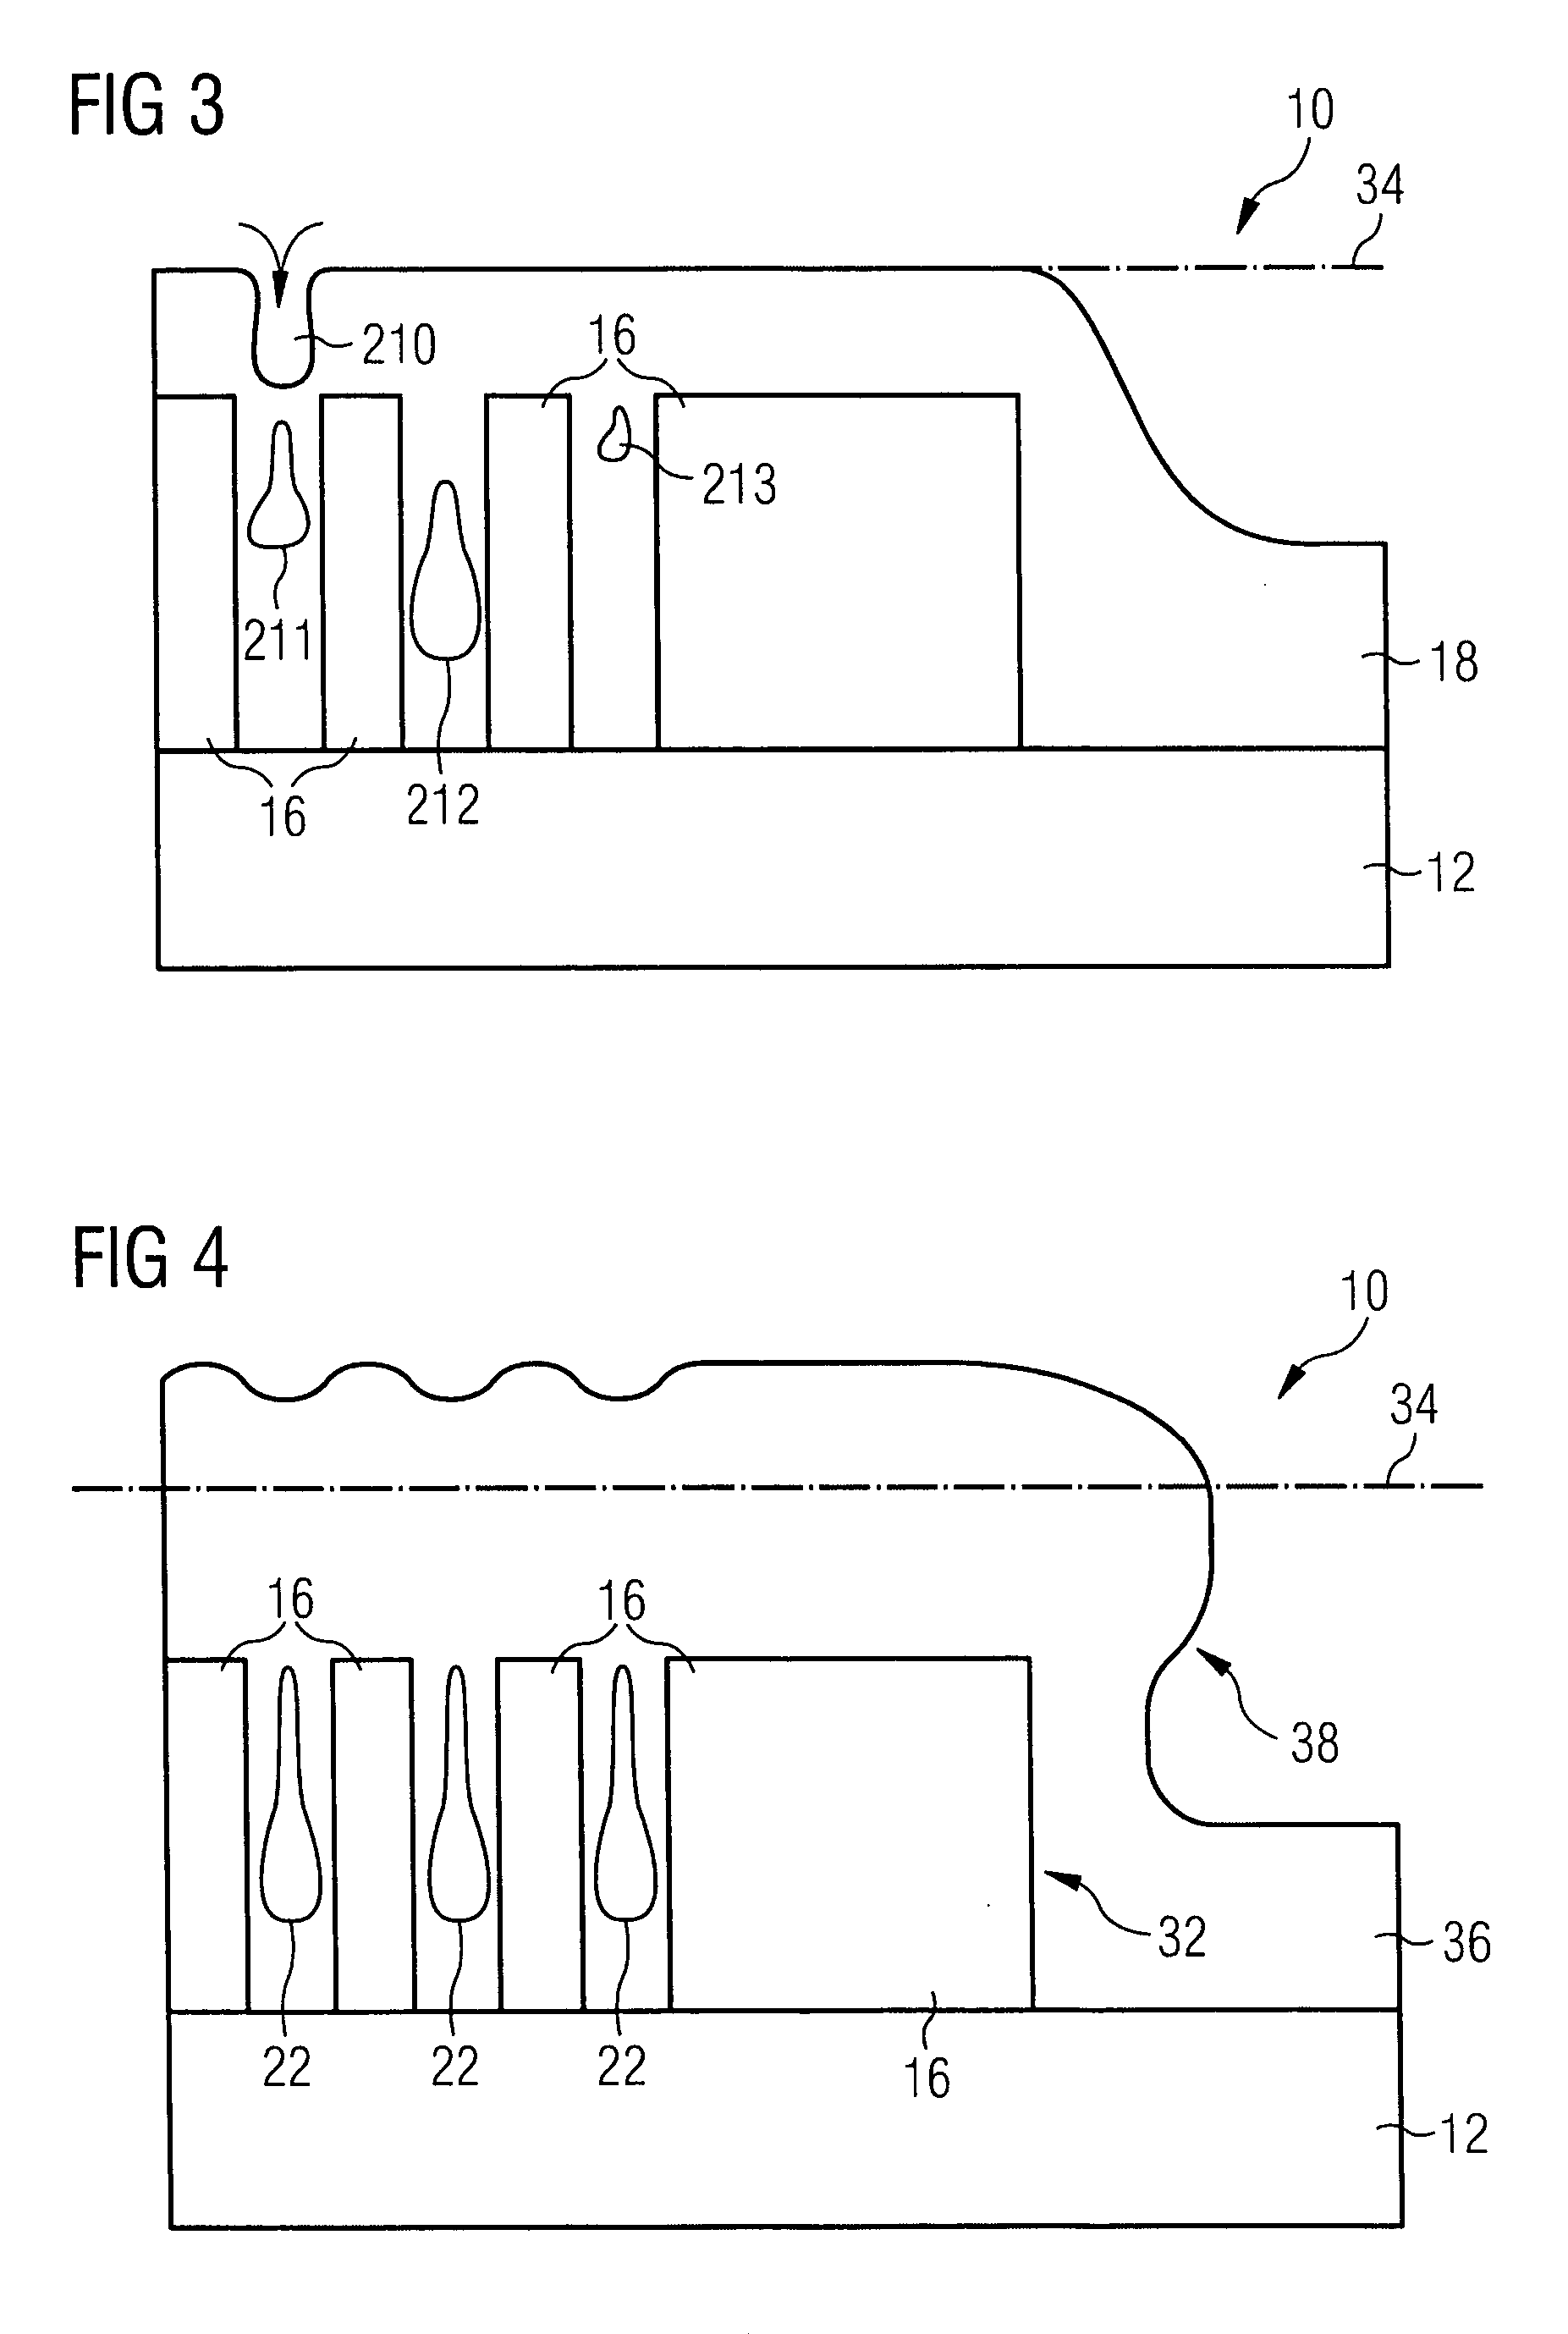 Method of forming an electrical isolation associated with a wiring level on a semiconductor wafer